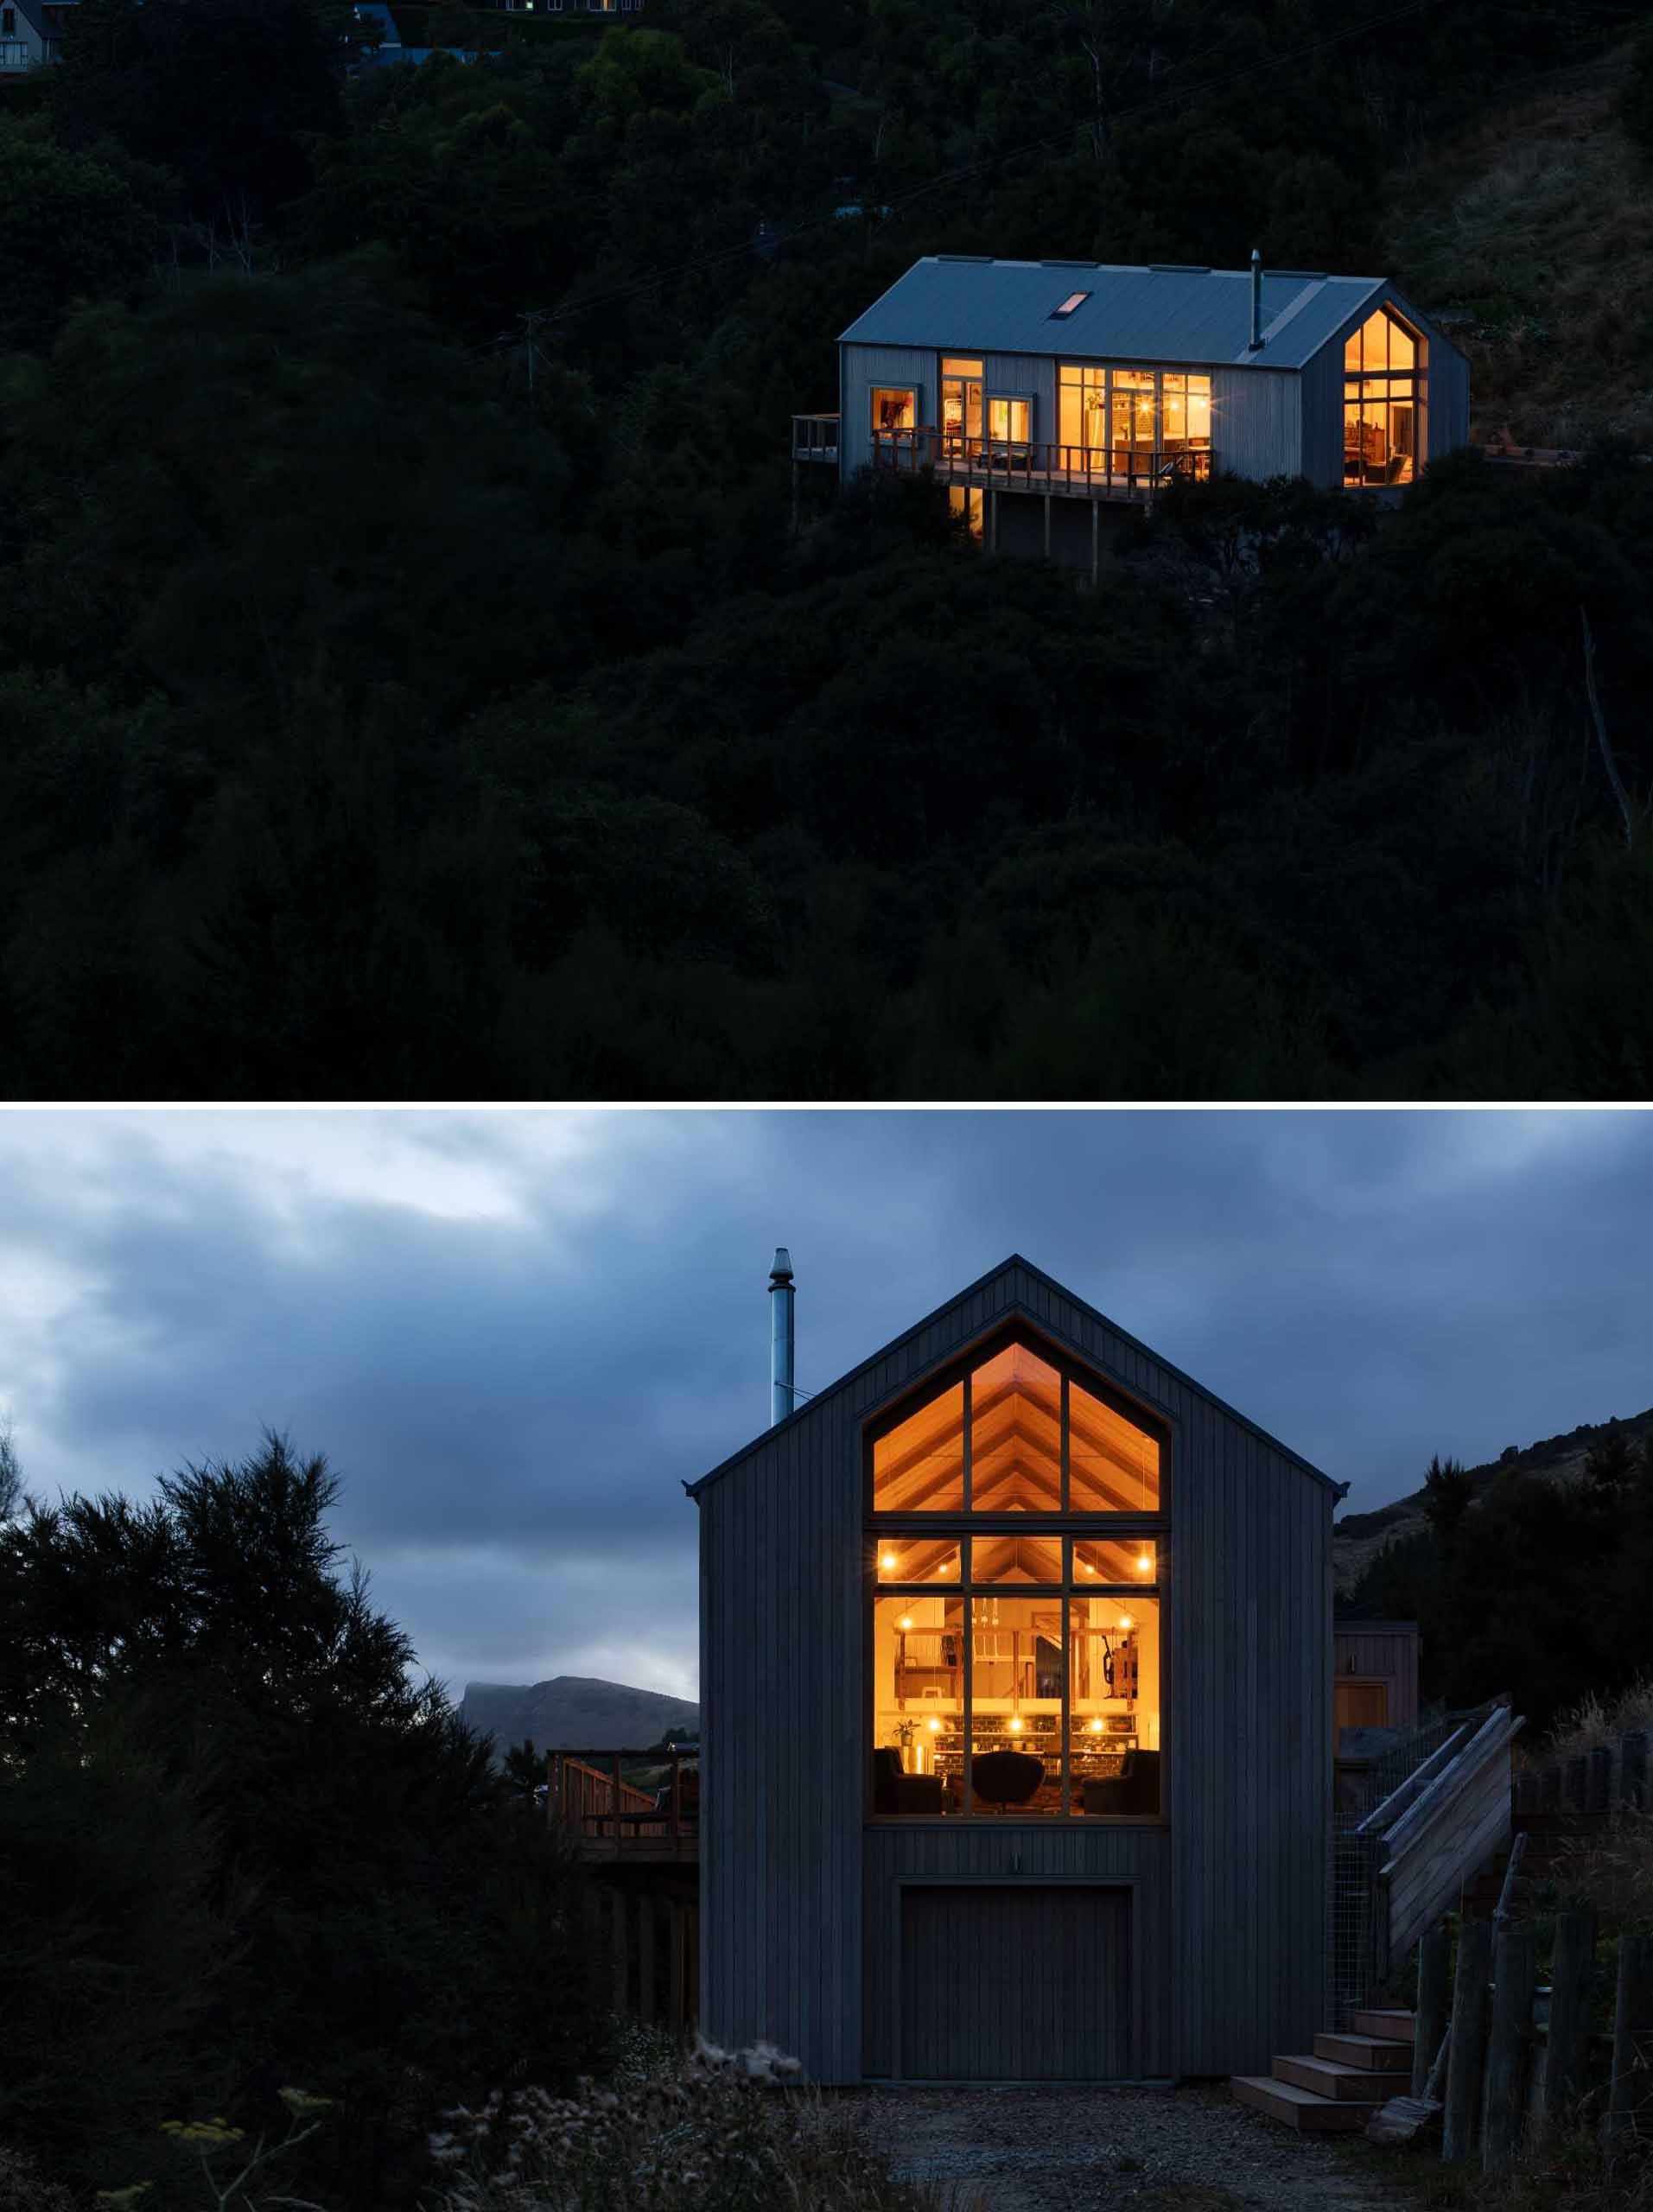 At night, this modern home lights up like a lantern on the hillside.